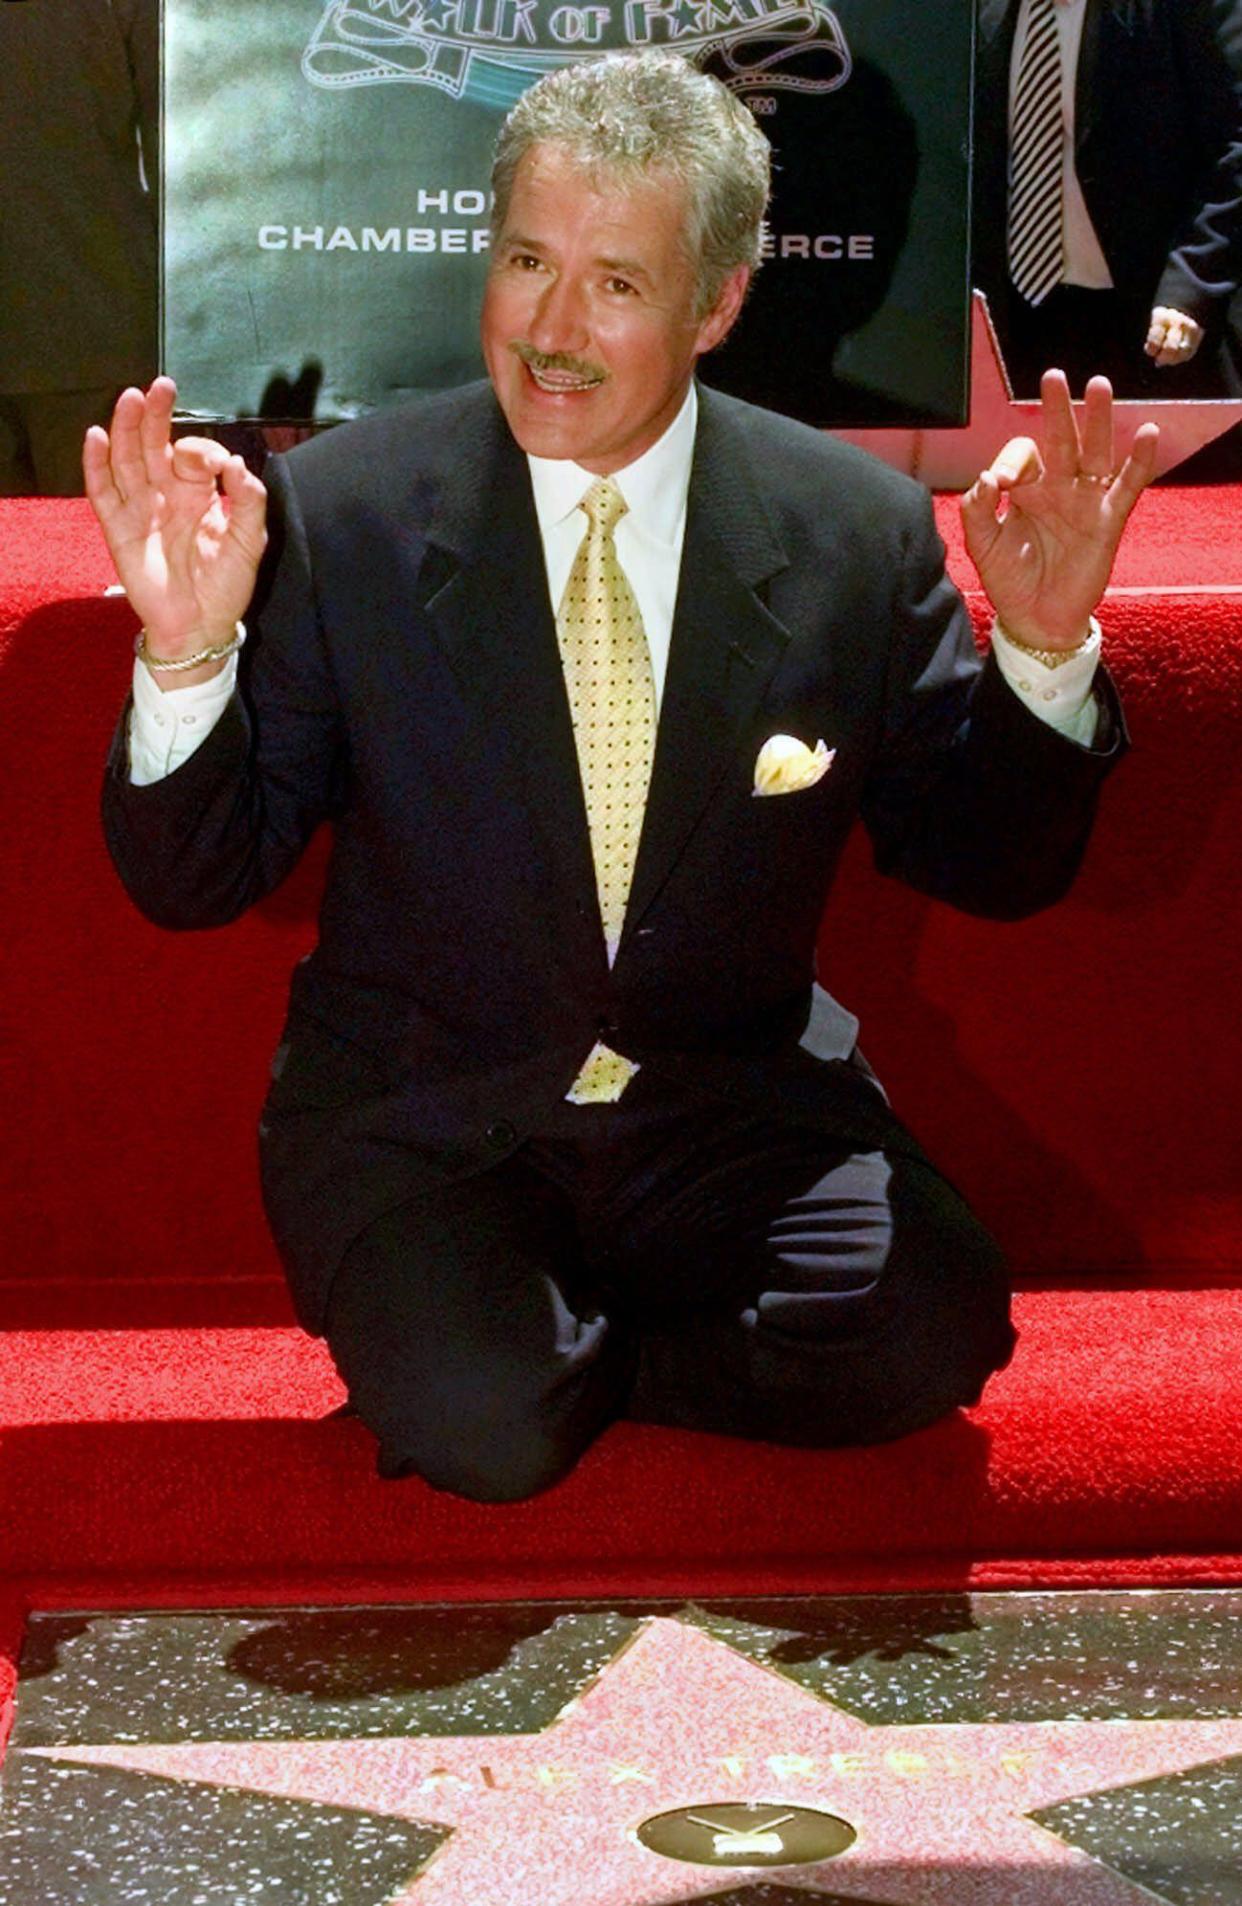 Emmy award-winning game show host Alex Trebek gestures to the 400 fans on hand to watch him receive his newly-dedicated star on the Hollywood Walk of Fame in Los Angeles on May 17, 1999.